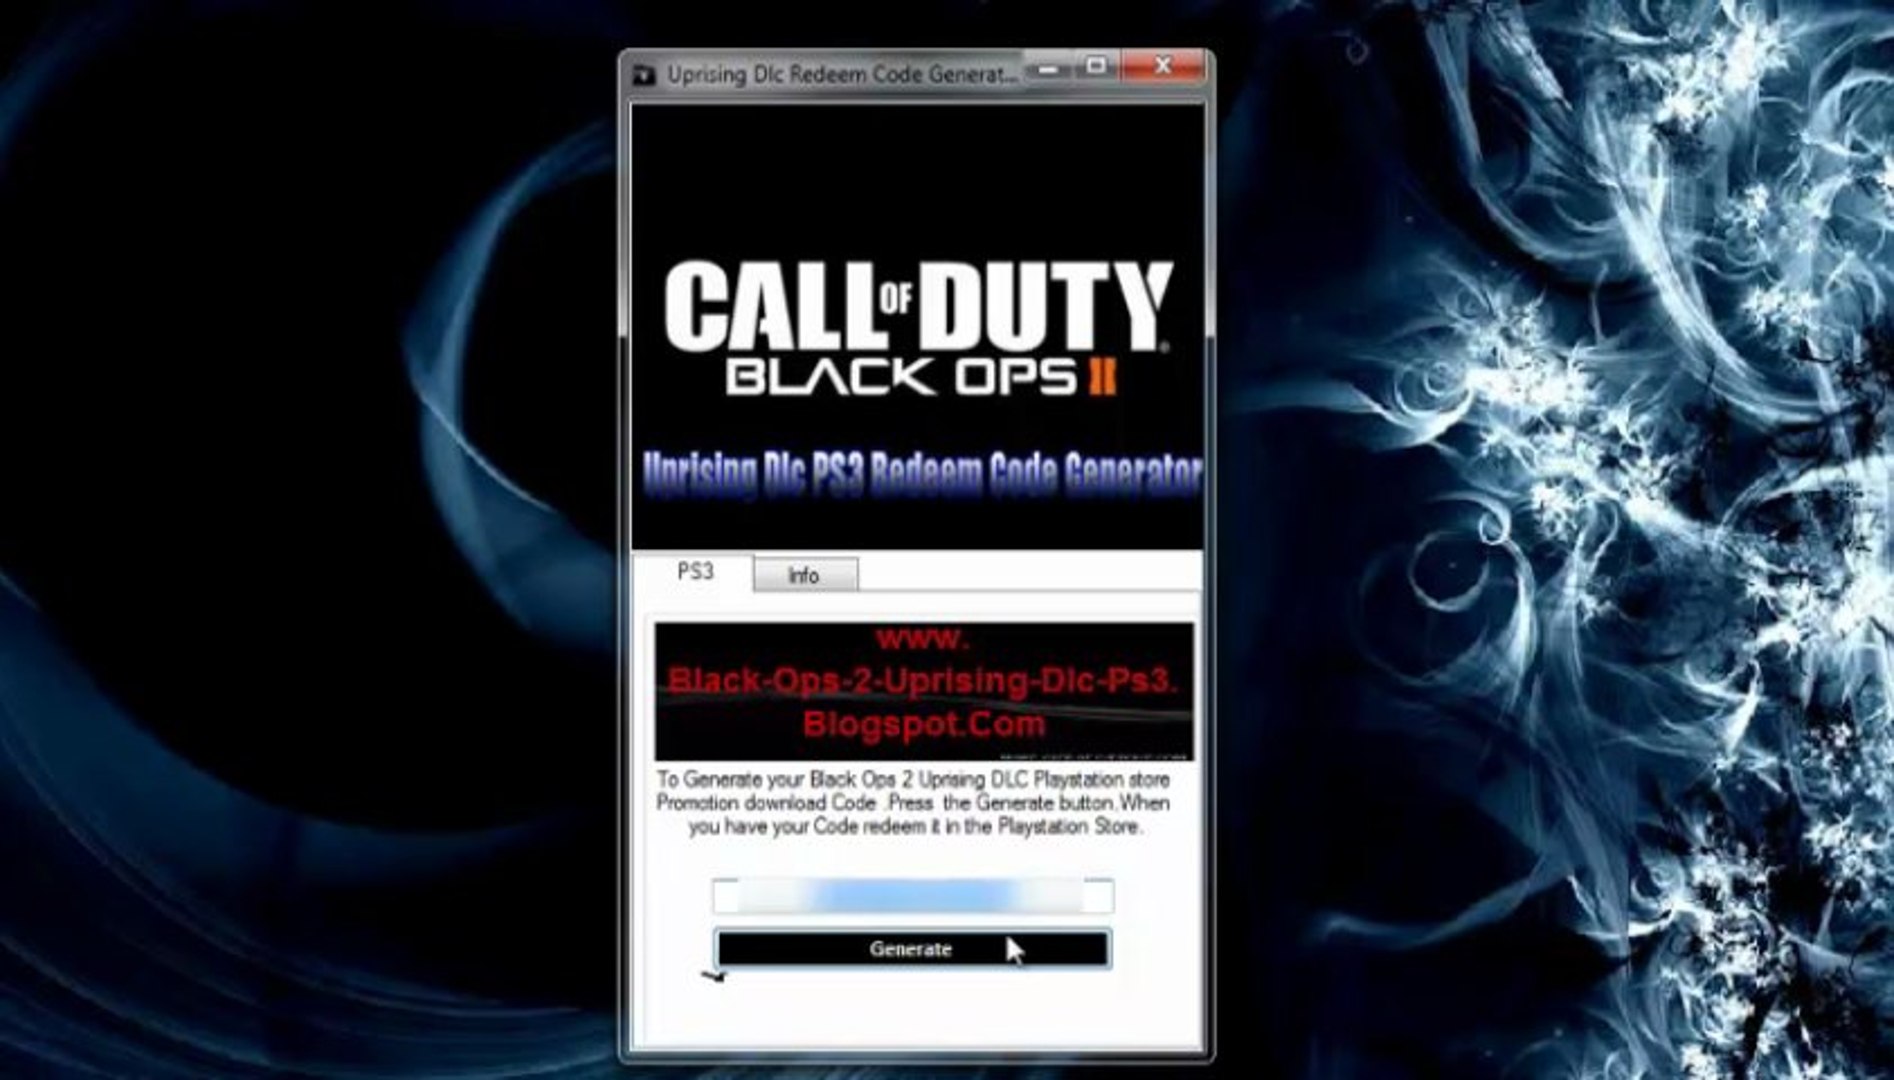 Black ops 2 Uprising Free DLC Codes Download , PS3 & PC - video Dailymotion